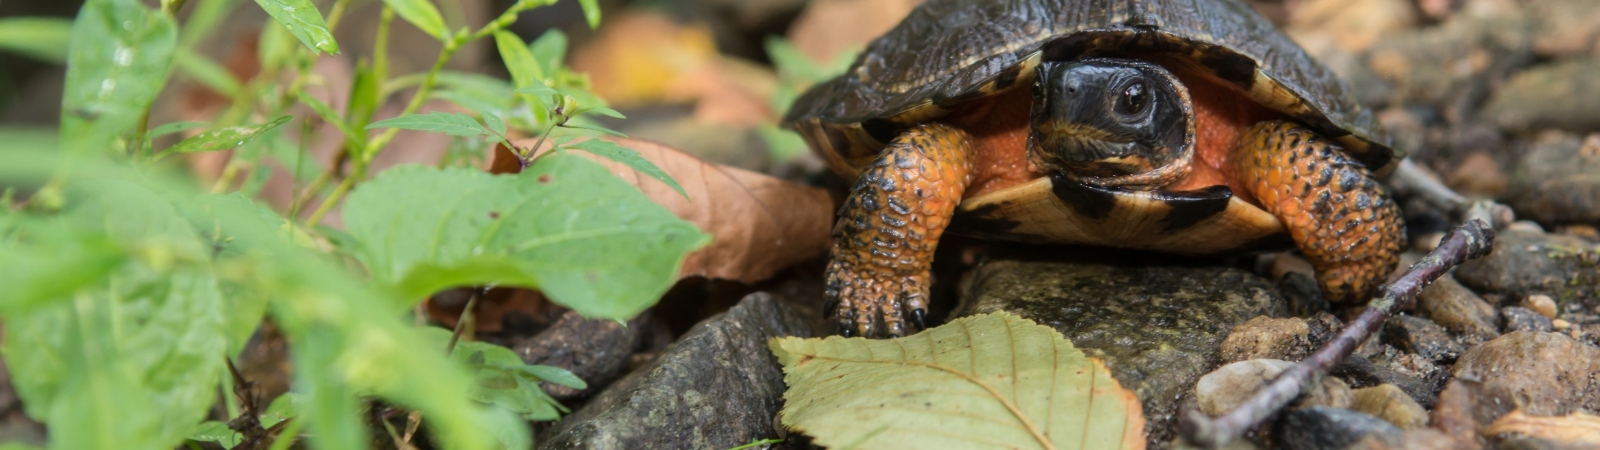 a wood turtle sitting on a rock with green leaves